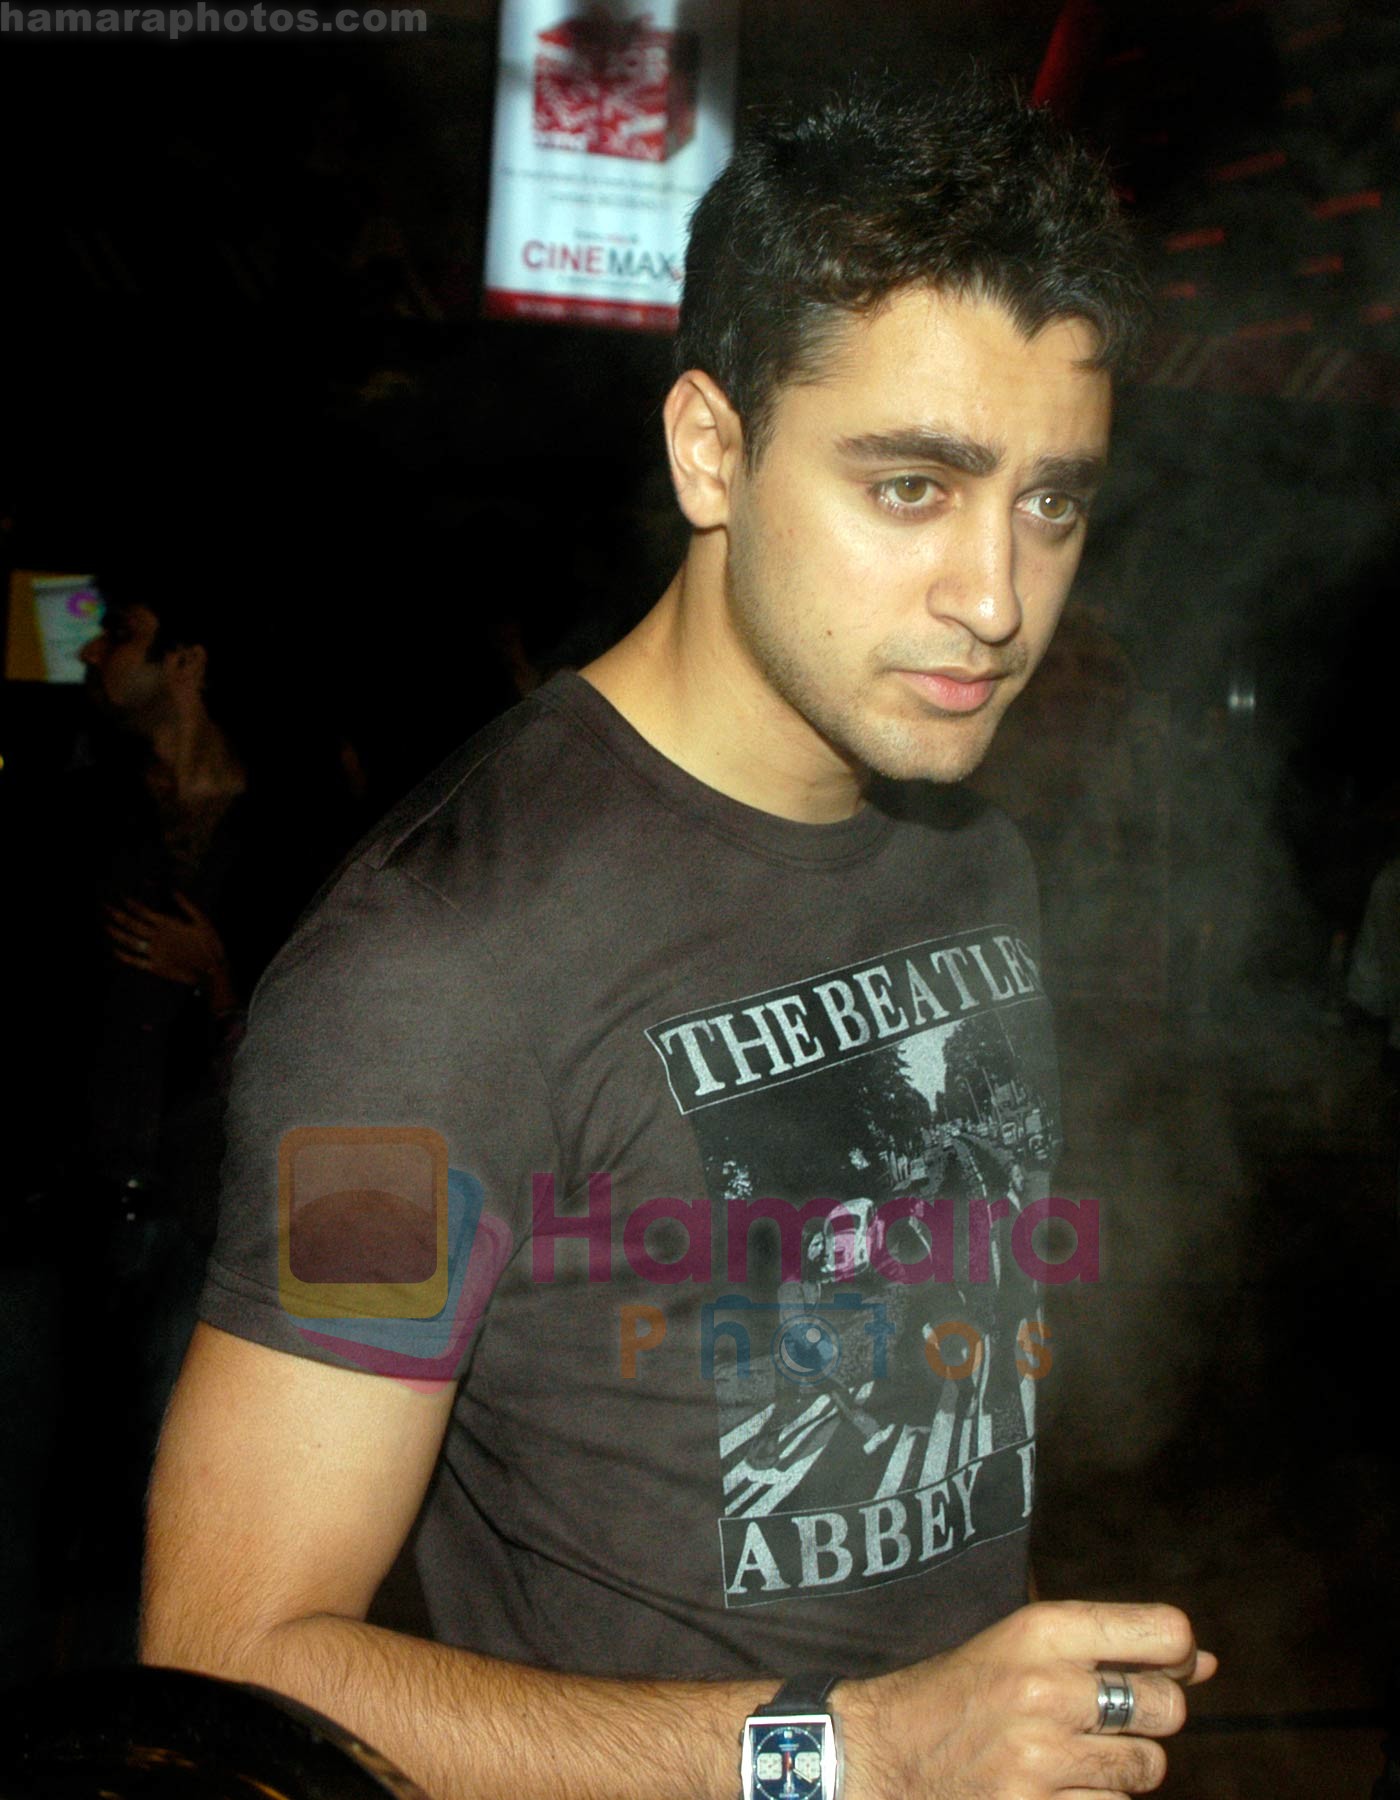 Imran khan at Yeh Mera India premiere in Cinemax on 27th Aug 2009